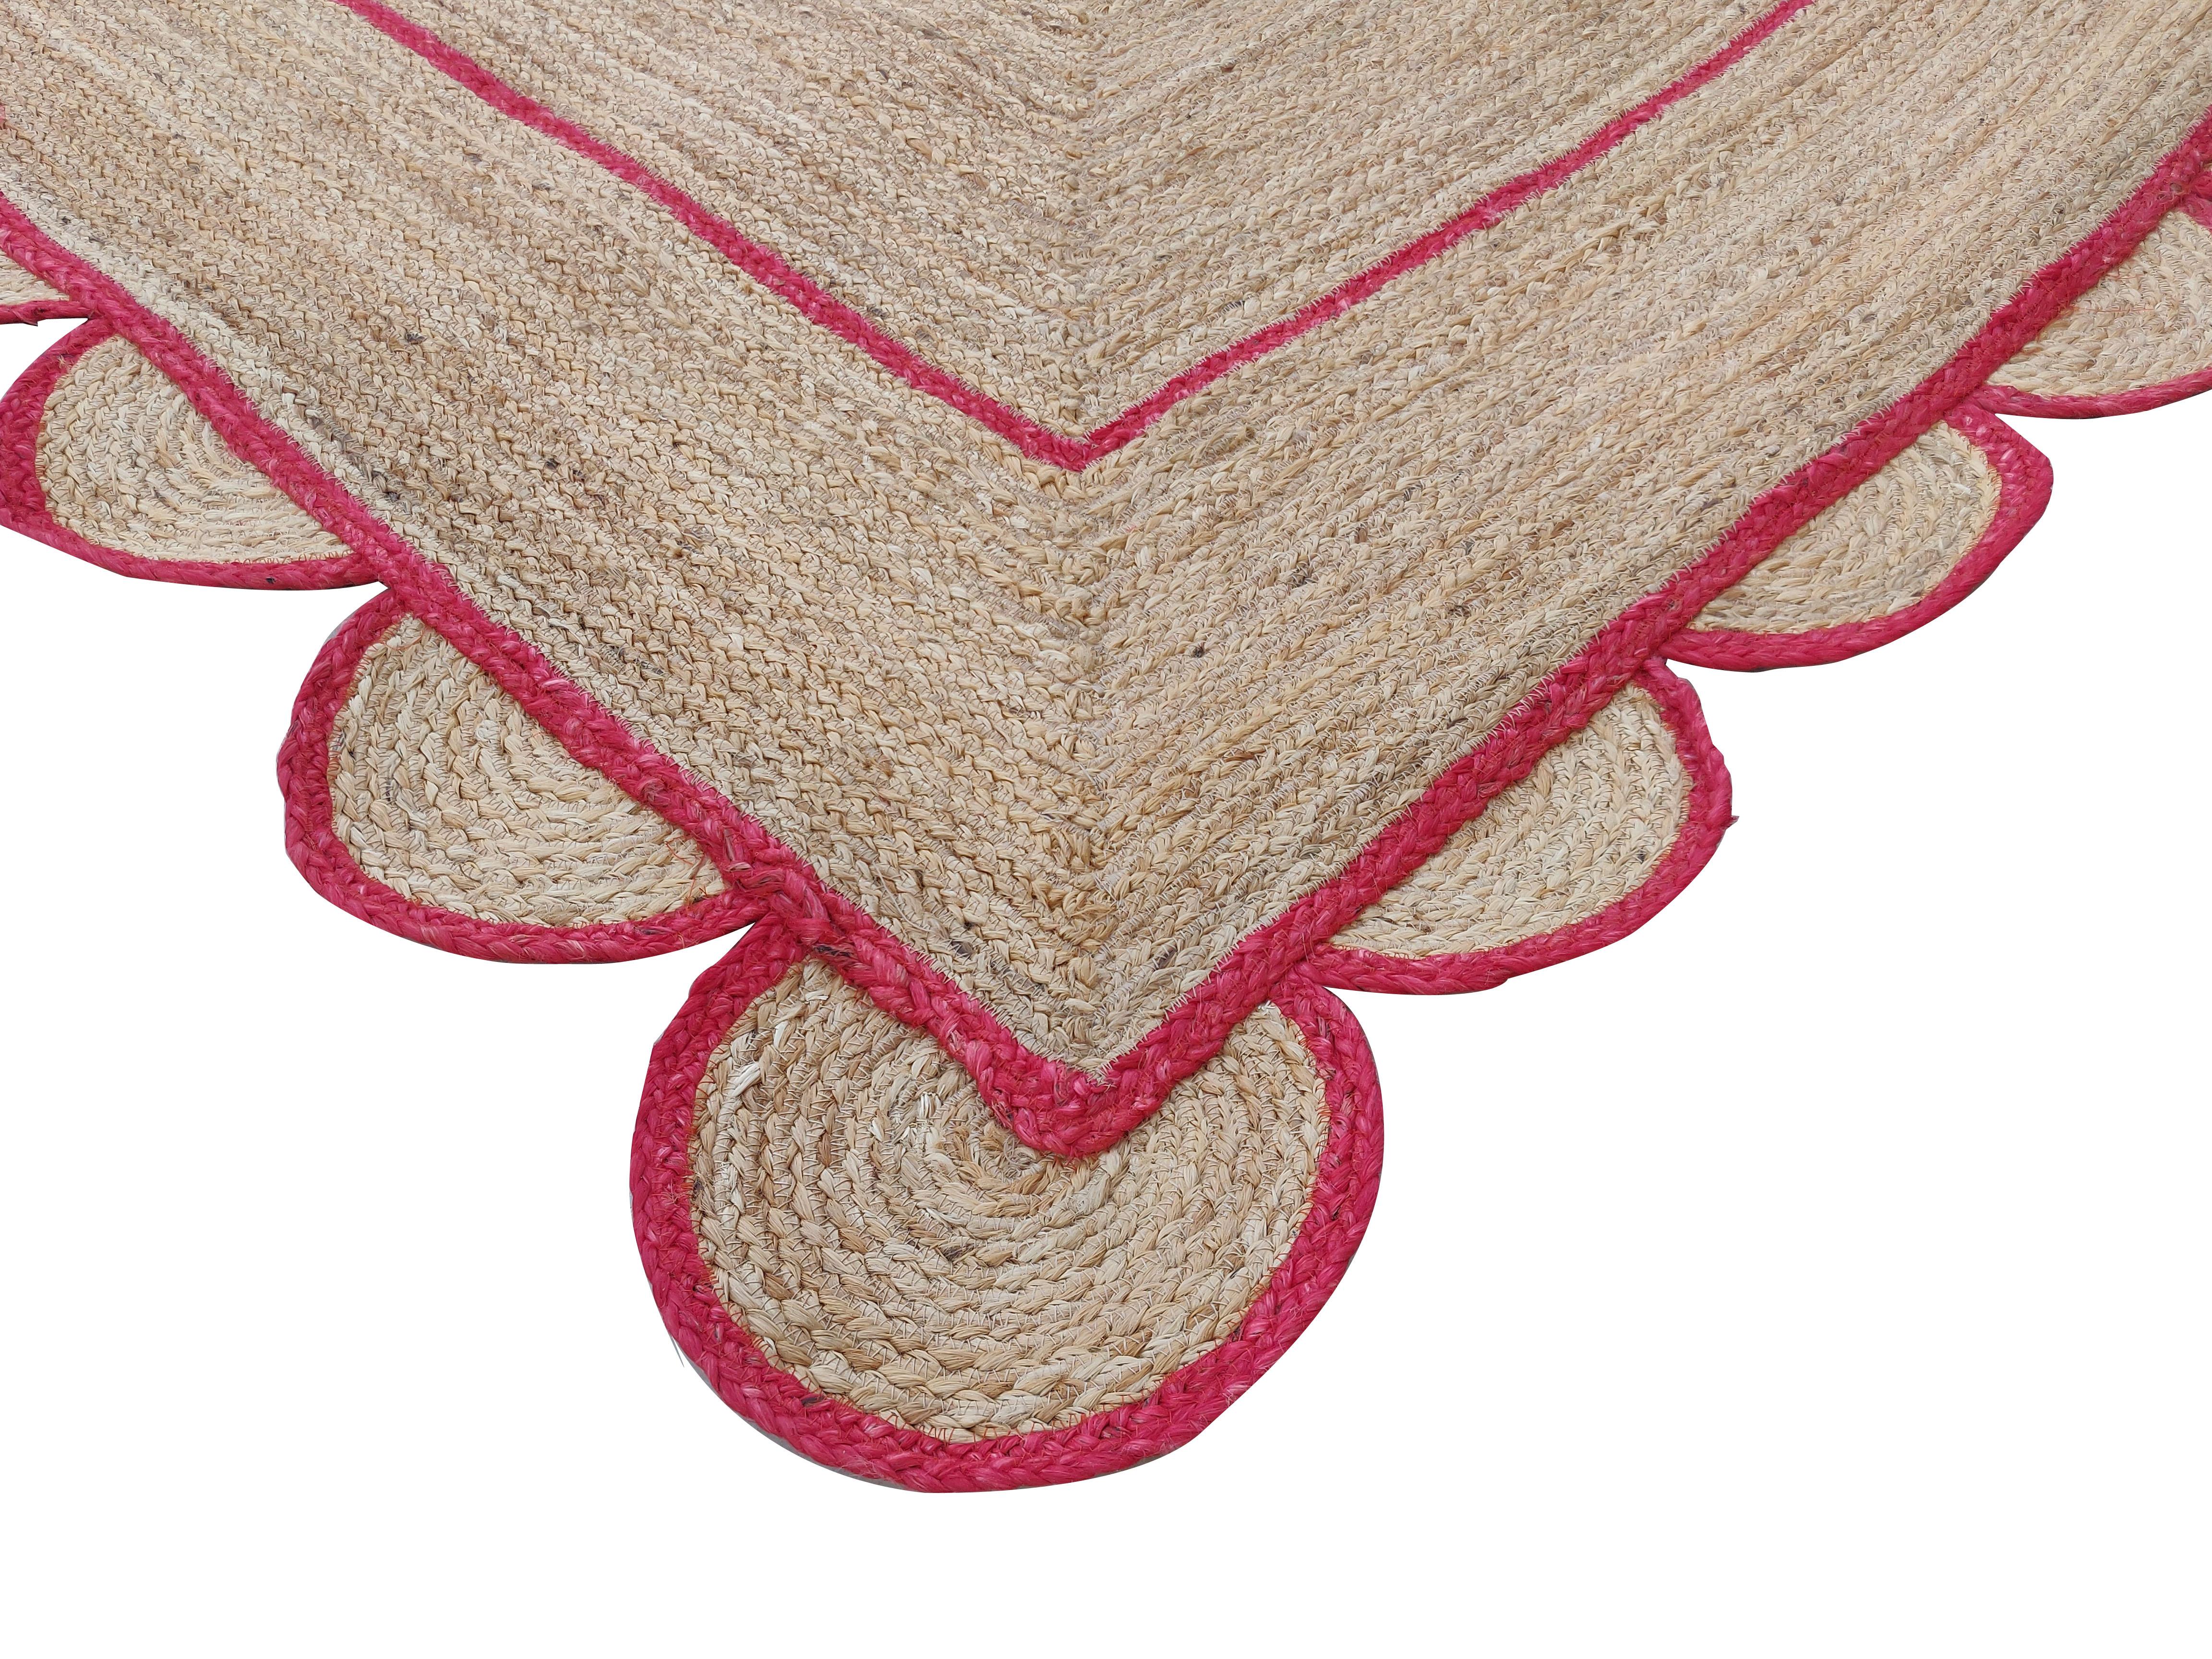 Handmade Jute Scalloped Rug, Red And Natural Jute Dhurrie -4'x6'

These special flat-weave dhurries are hand-woven with 15 ply 100% cotton yarn. Due to the special manufacturing techniques used to create our rugs, the size and color of each piece